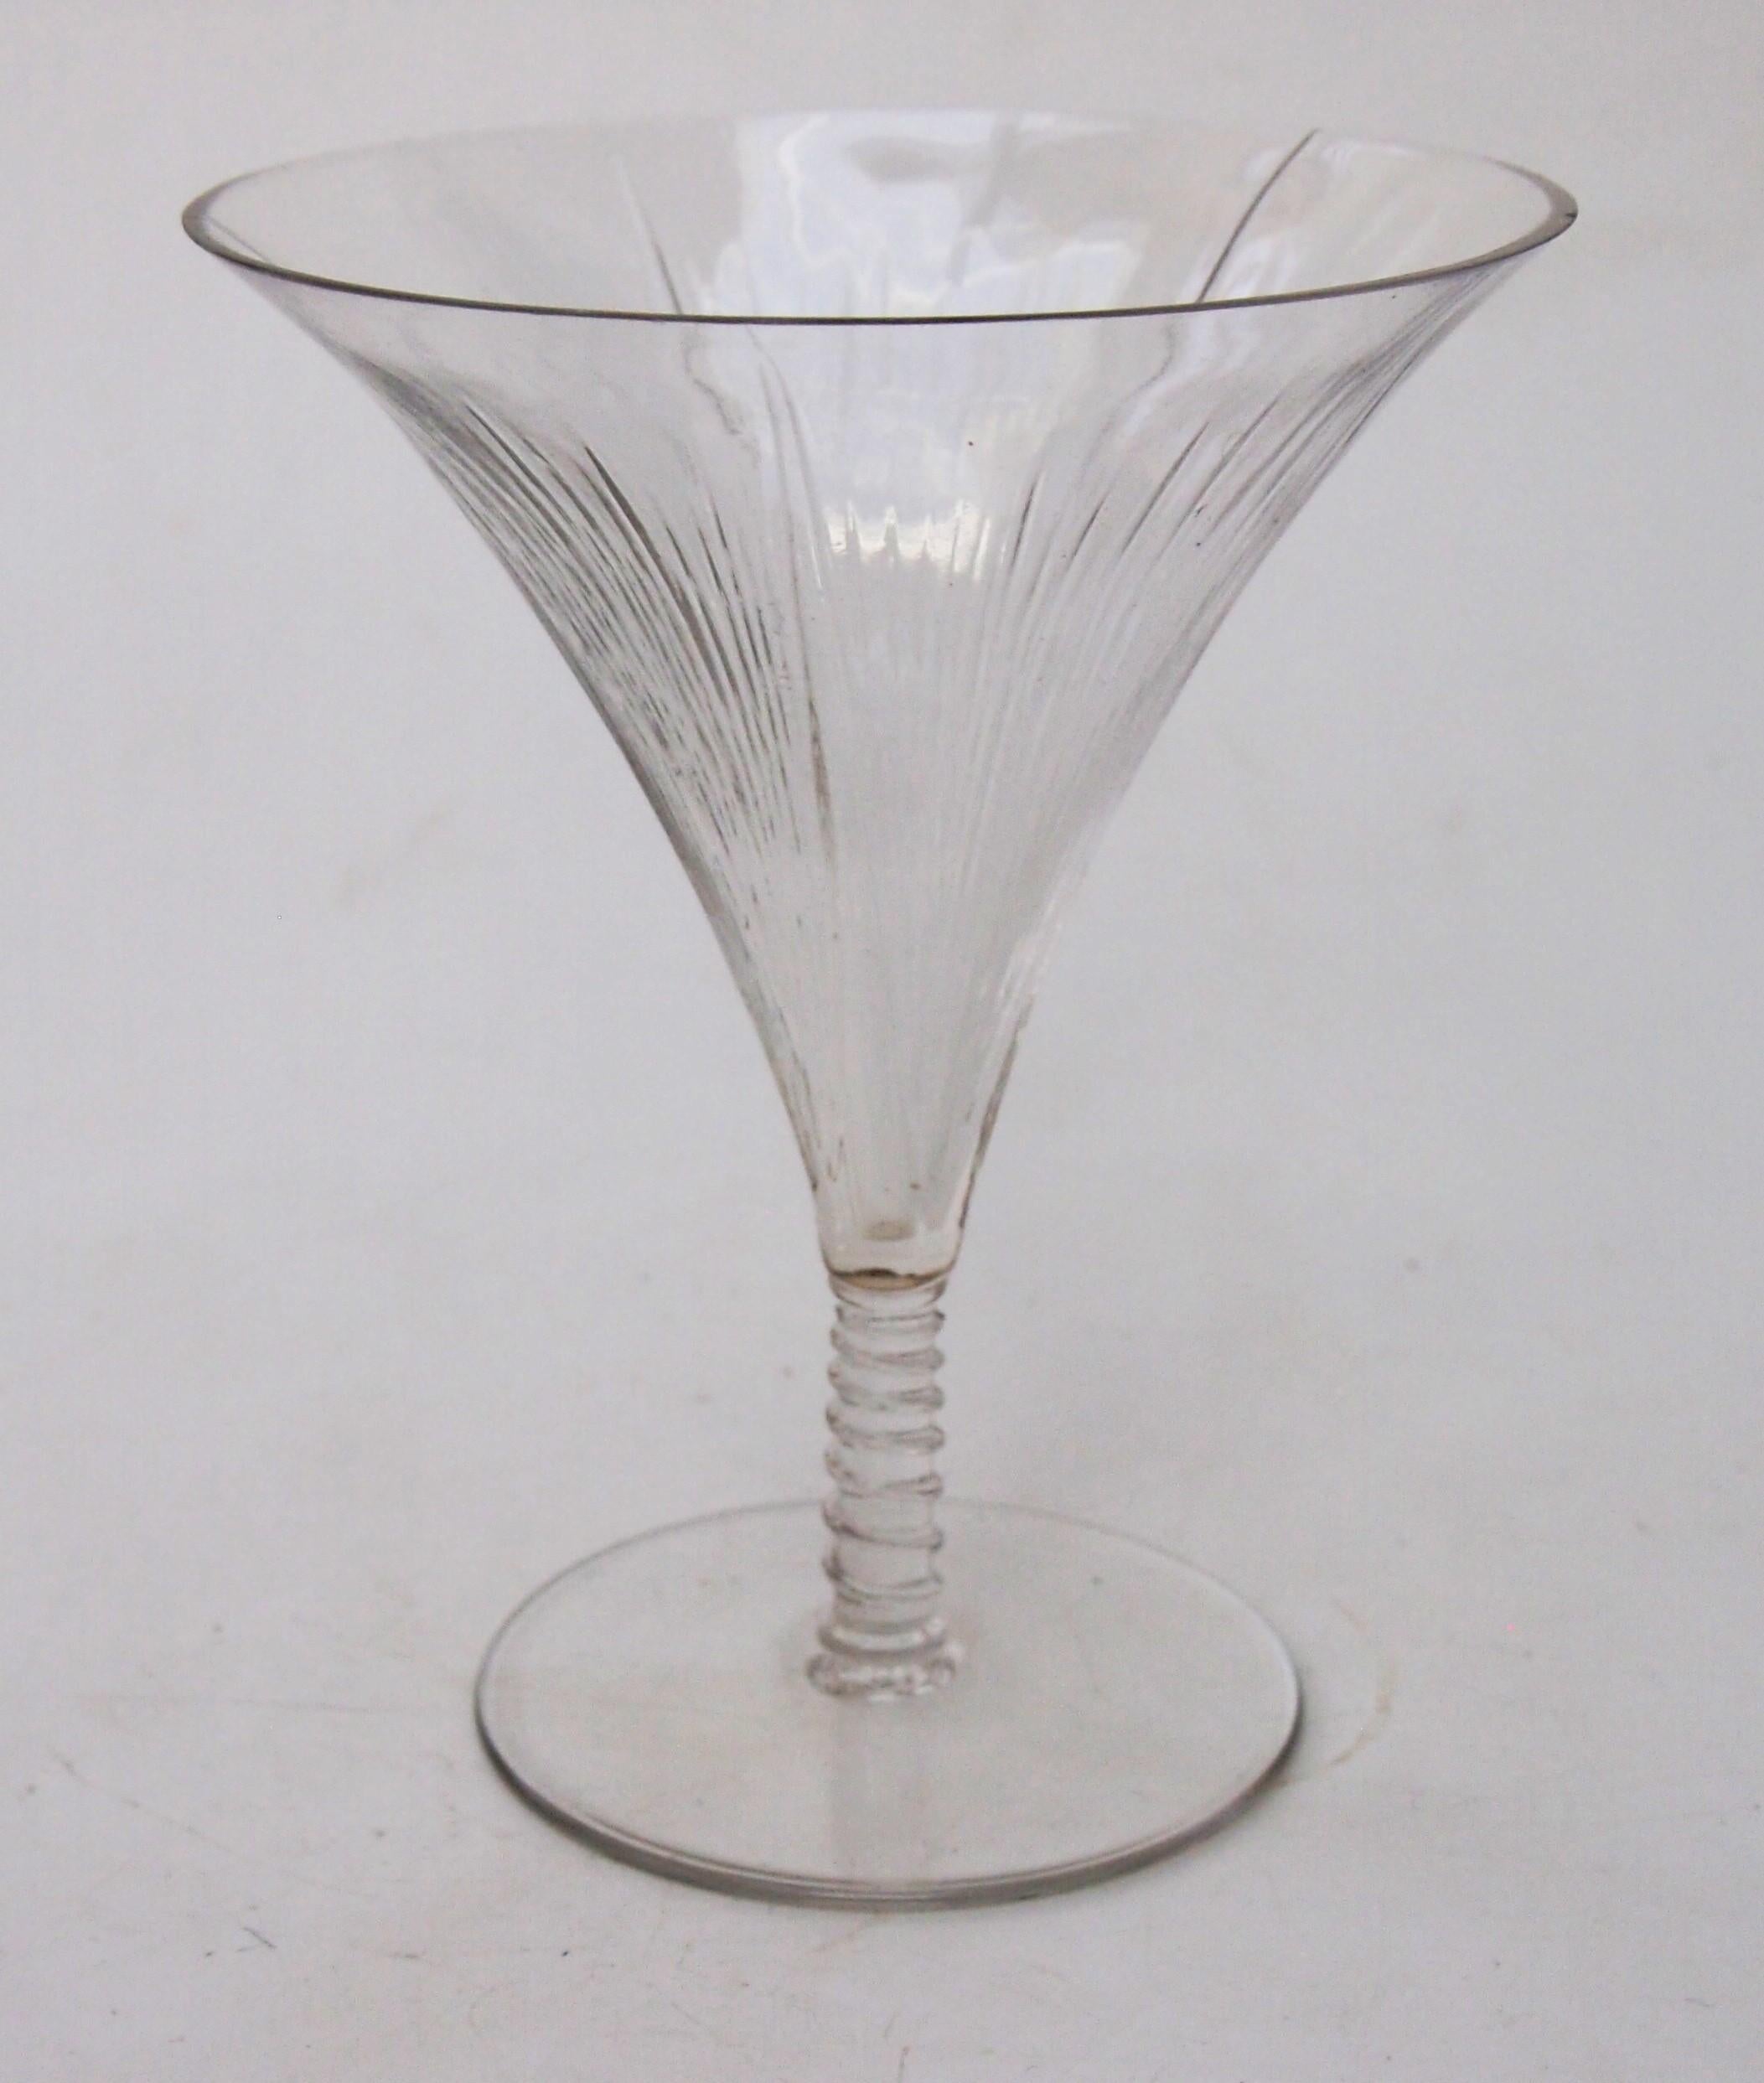 Rare and intricate René Lalique Liseron footed glass made c 1921 -signed to the base of the stem R Lalique France in a tiny circle.The trumpet shaped Liseron pattern is one of the rarest glasses made by Rene Lalique - in the Lalique bible by Felix